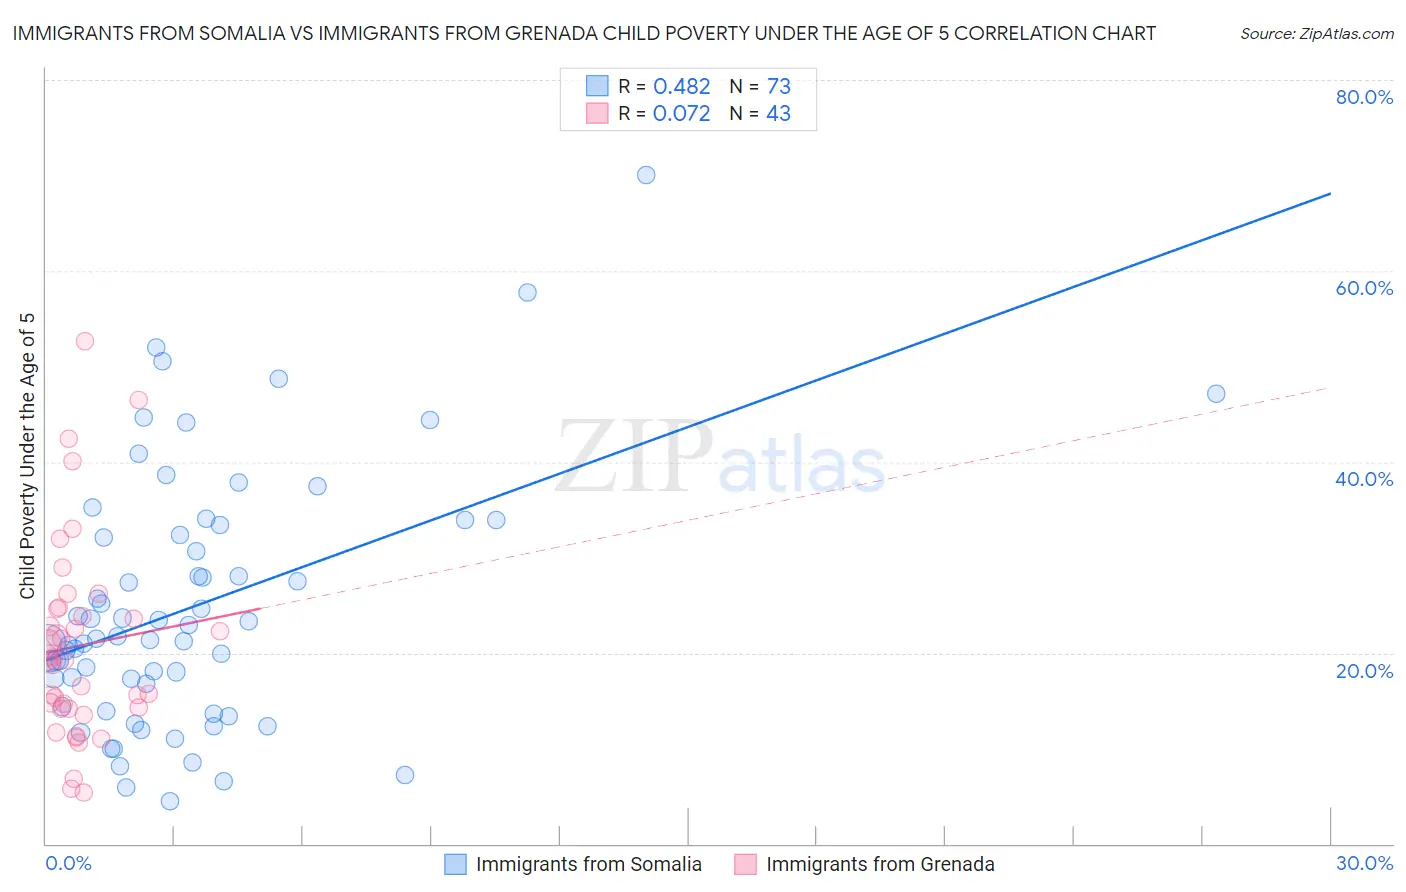 Immigrants from Somalia vs Immigrants from Grenada Child Poverty Under the Age of 5